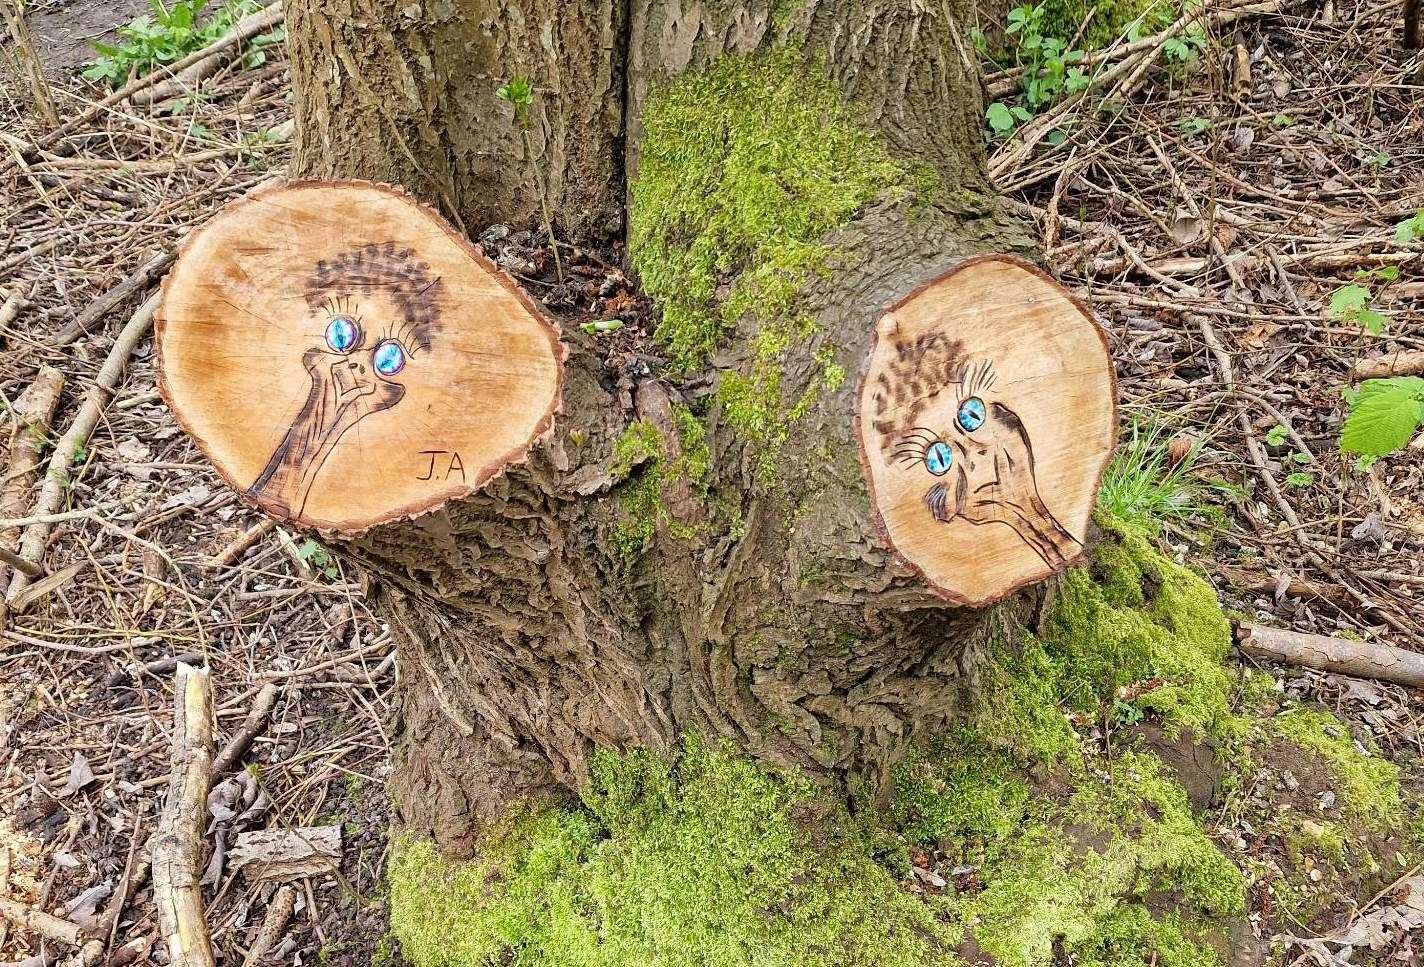 An artist from Ashford has created a variety of artwork in the woods. Picture: Jon Allcorn